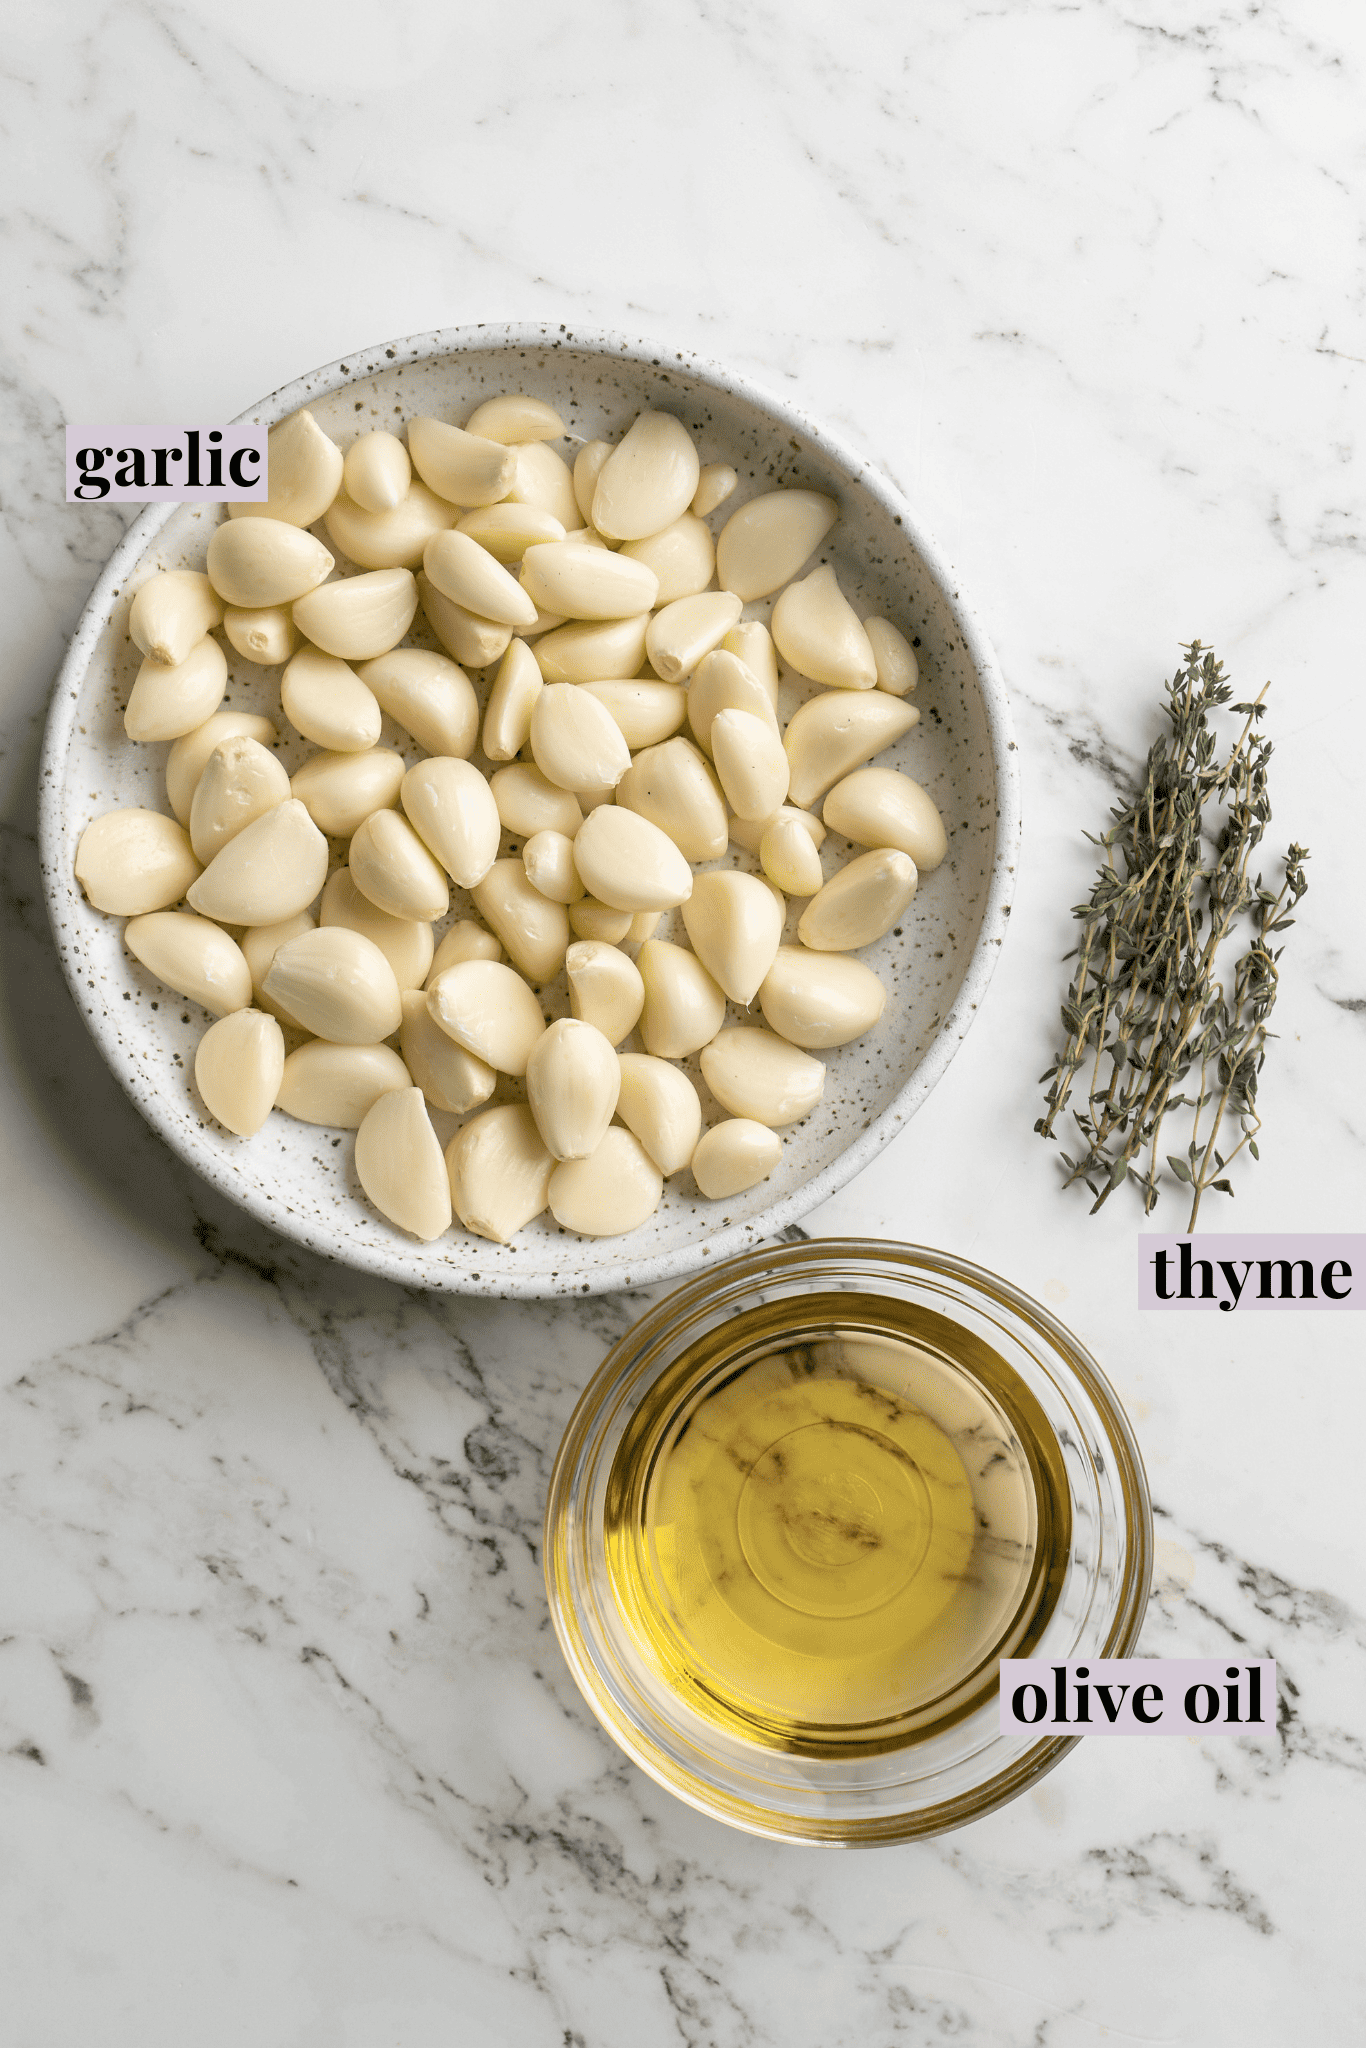 Overhead view of ingredients for garlic confit with labels